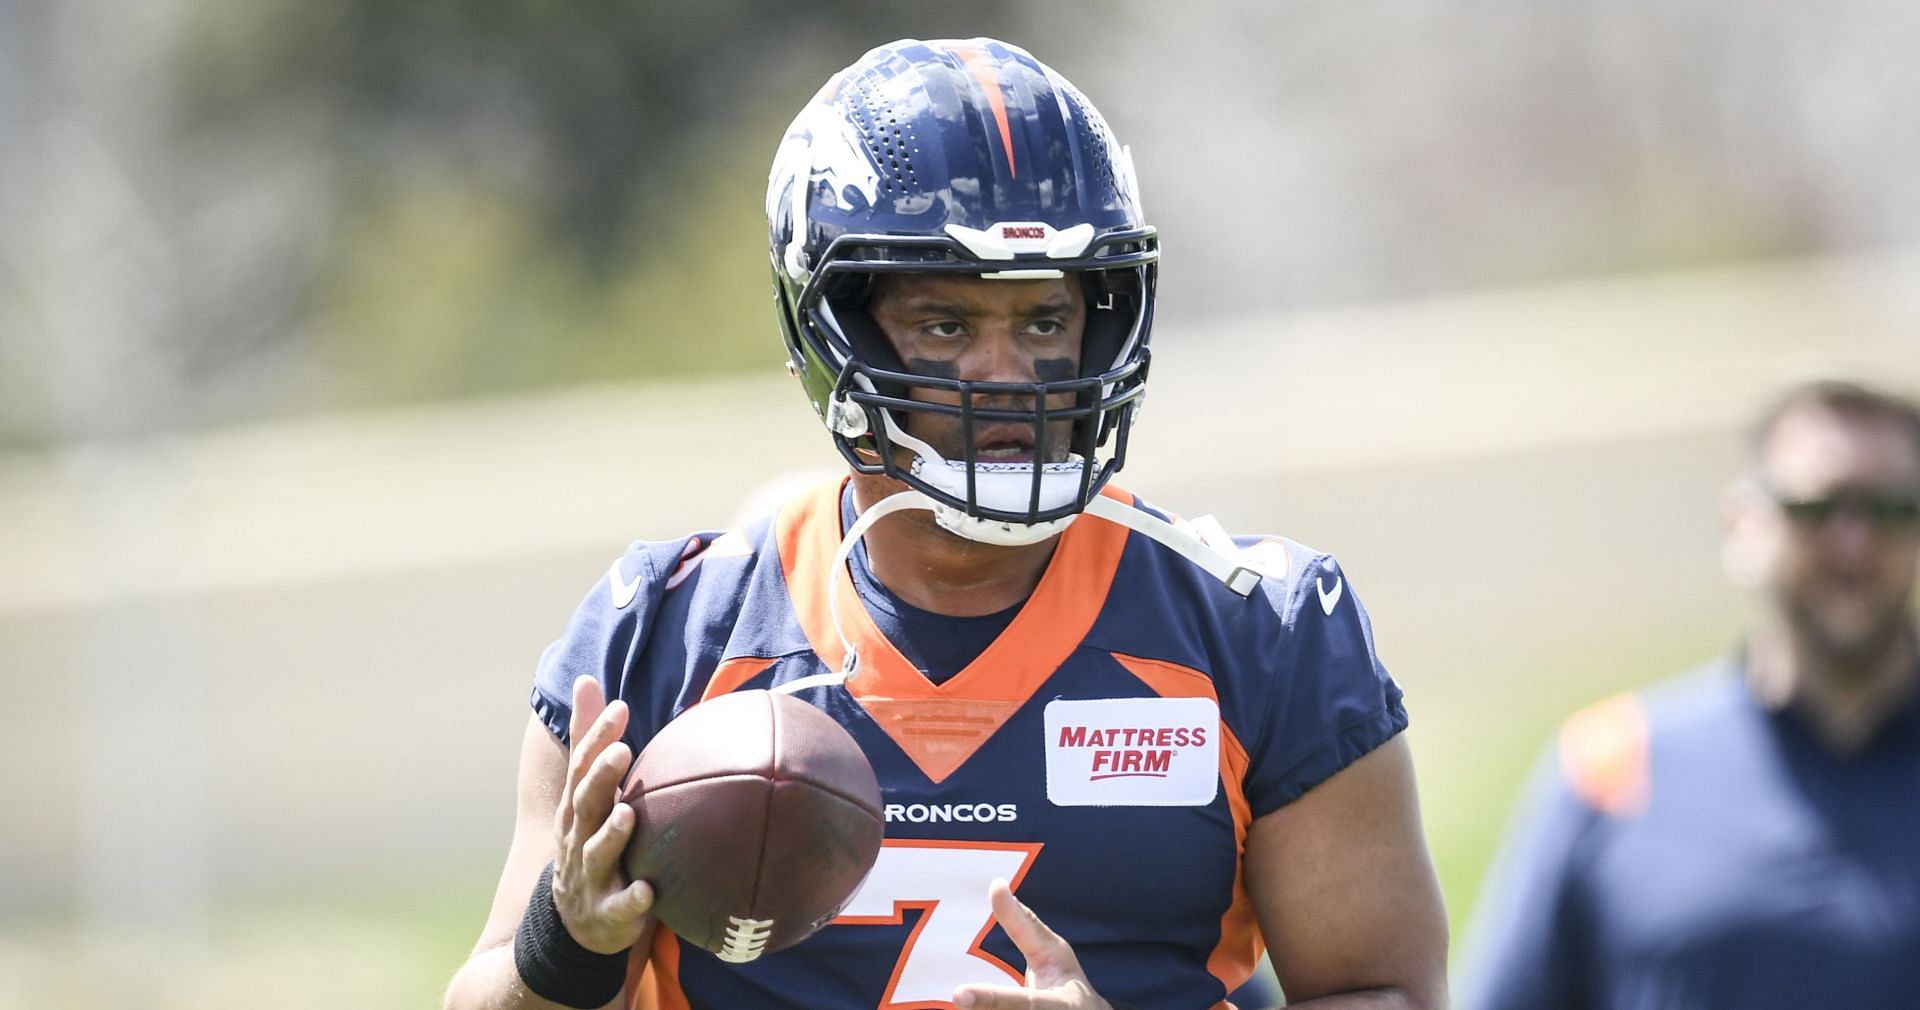 Russell Wilson will lead the line for the Broncos